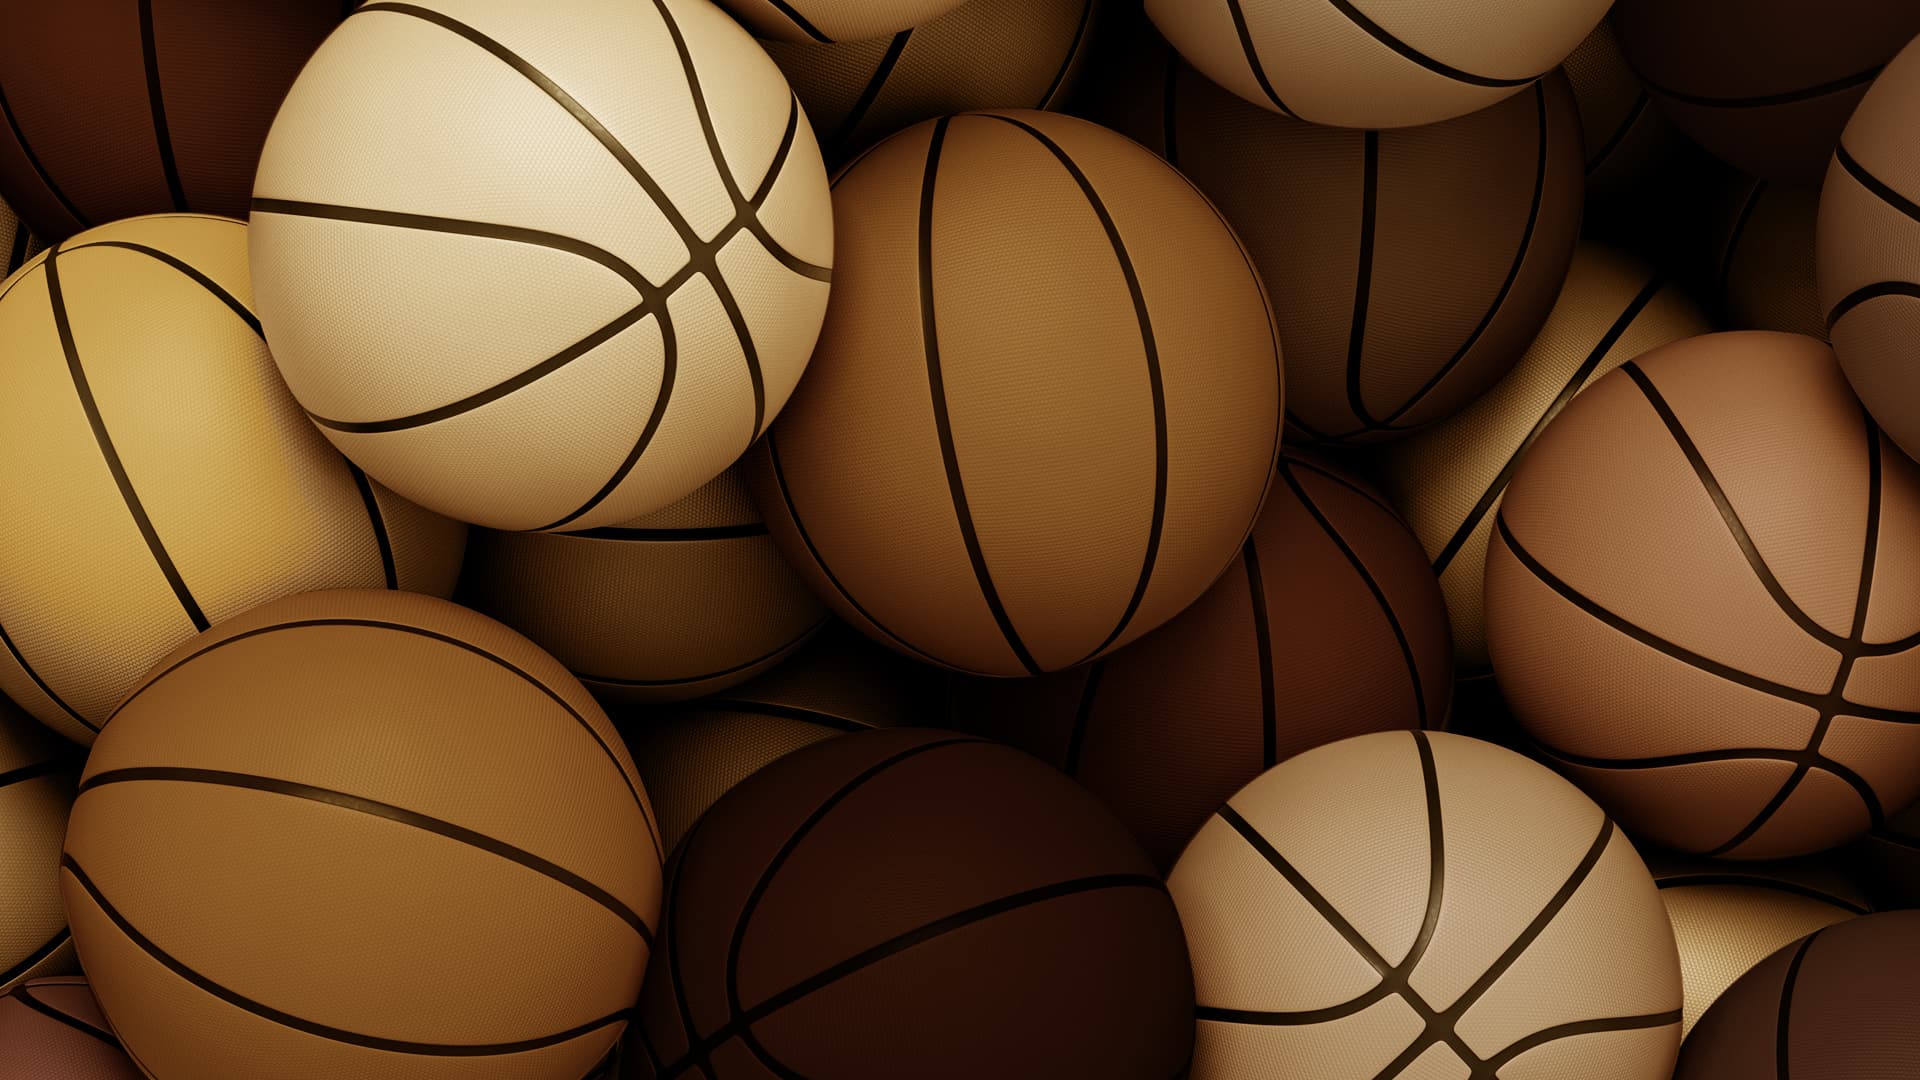 Basketballs in different shades